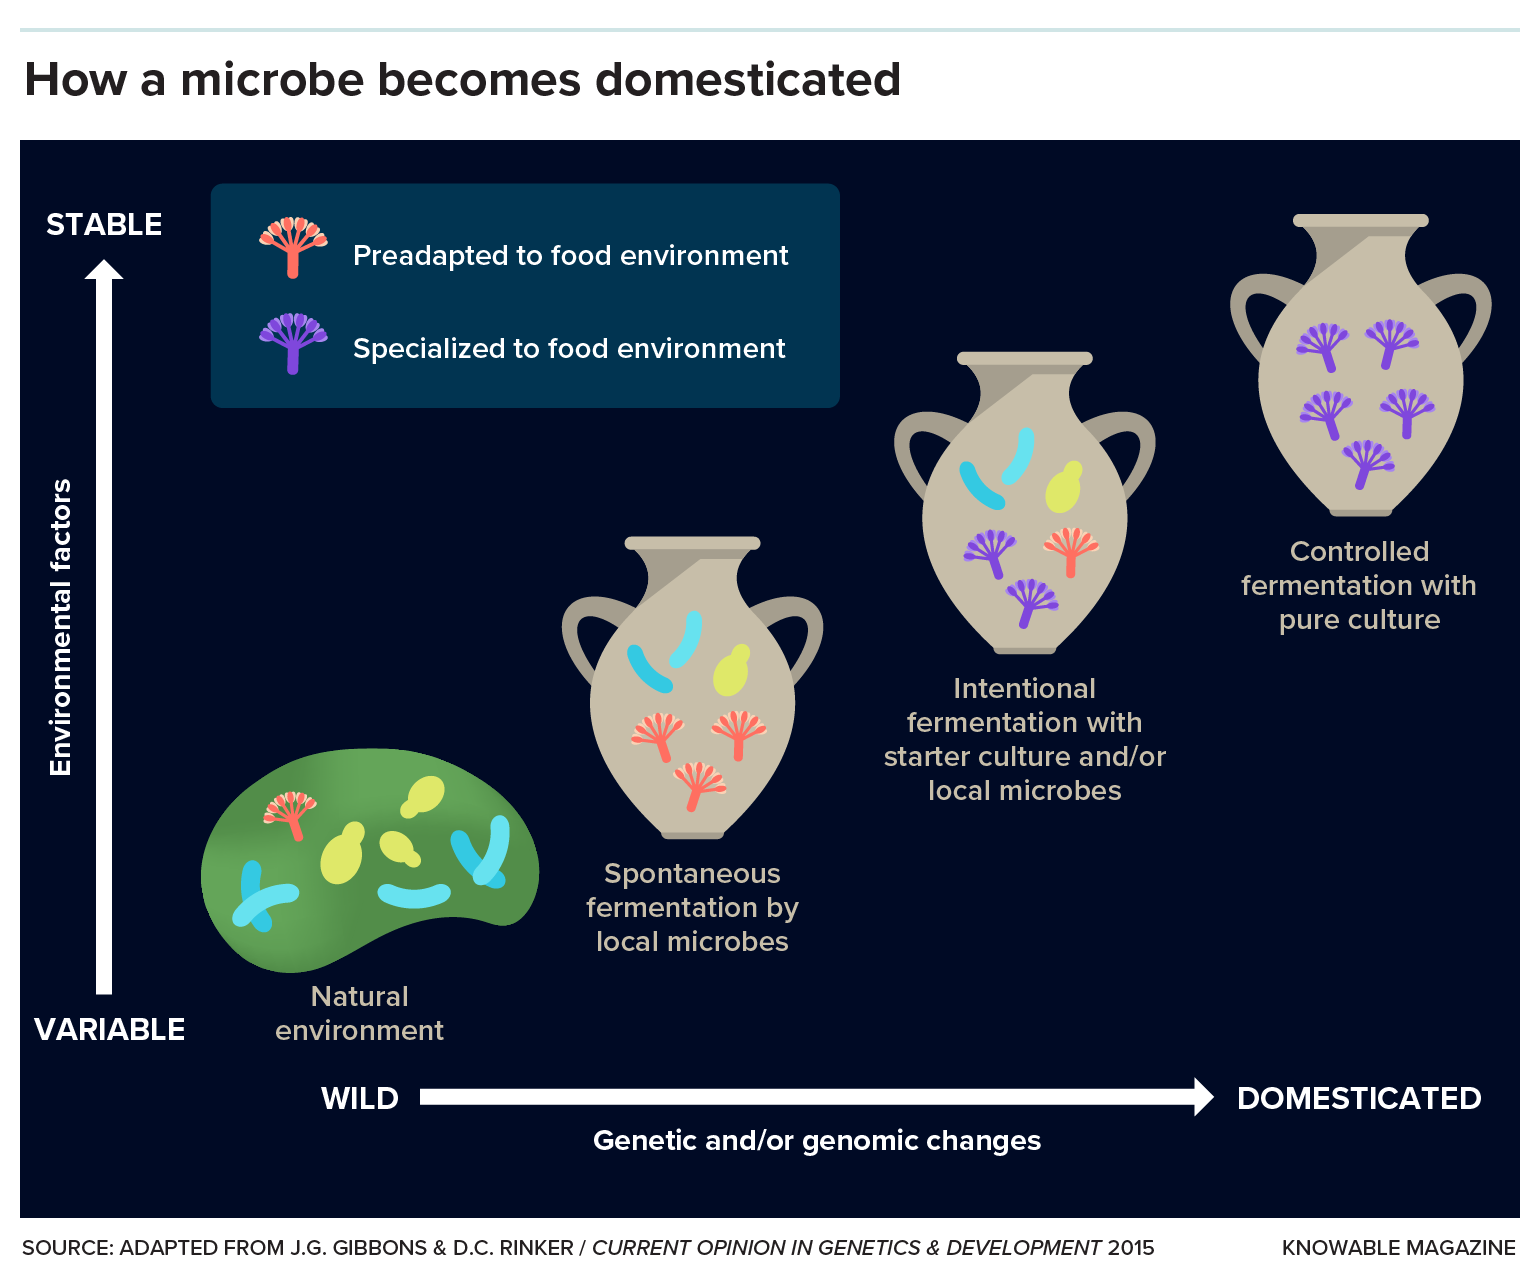 Scientists think that the domestication of a microbe could go something like this: It exists, along with other microbes, in the wild, where environmental factors such as temperature and humidity vary (bottom left). Over time, it becomes adapted to the stable, comfortable food environment (middle) and eventually exists as a pure culture in a very controlled environment. CREDIT: Knowable Magazine